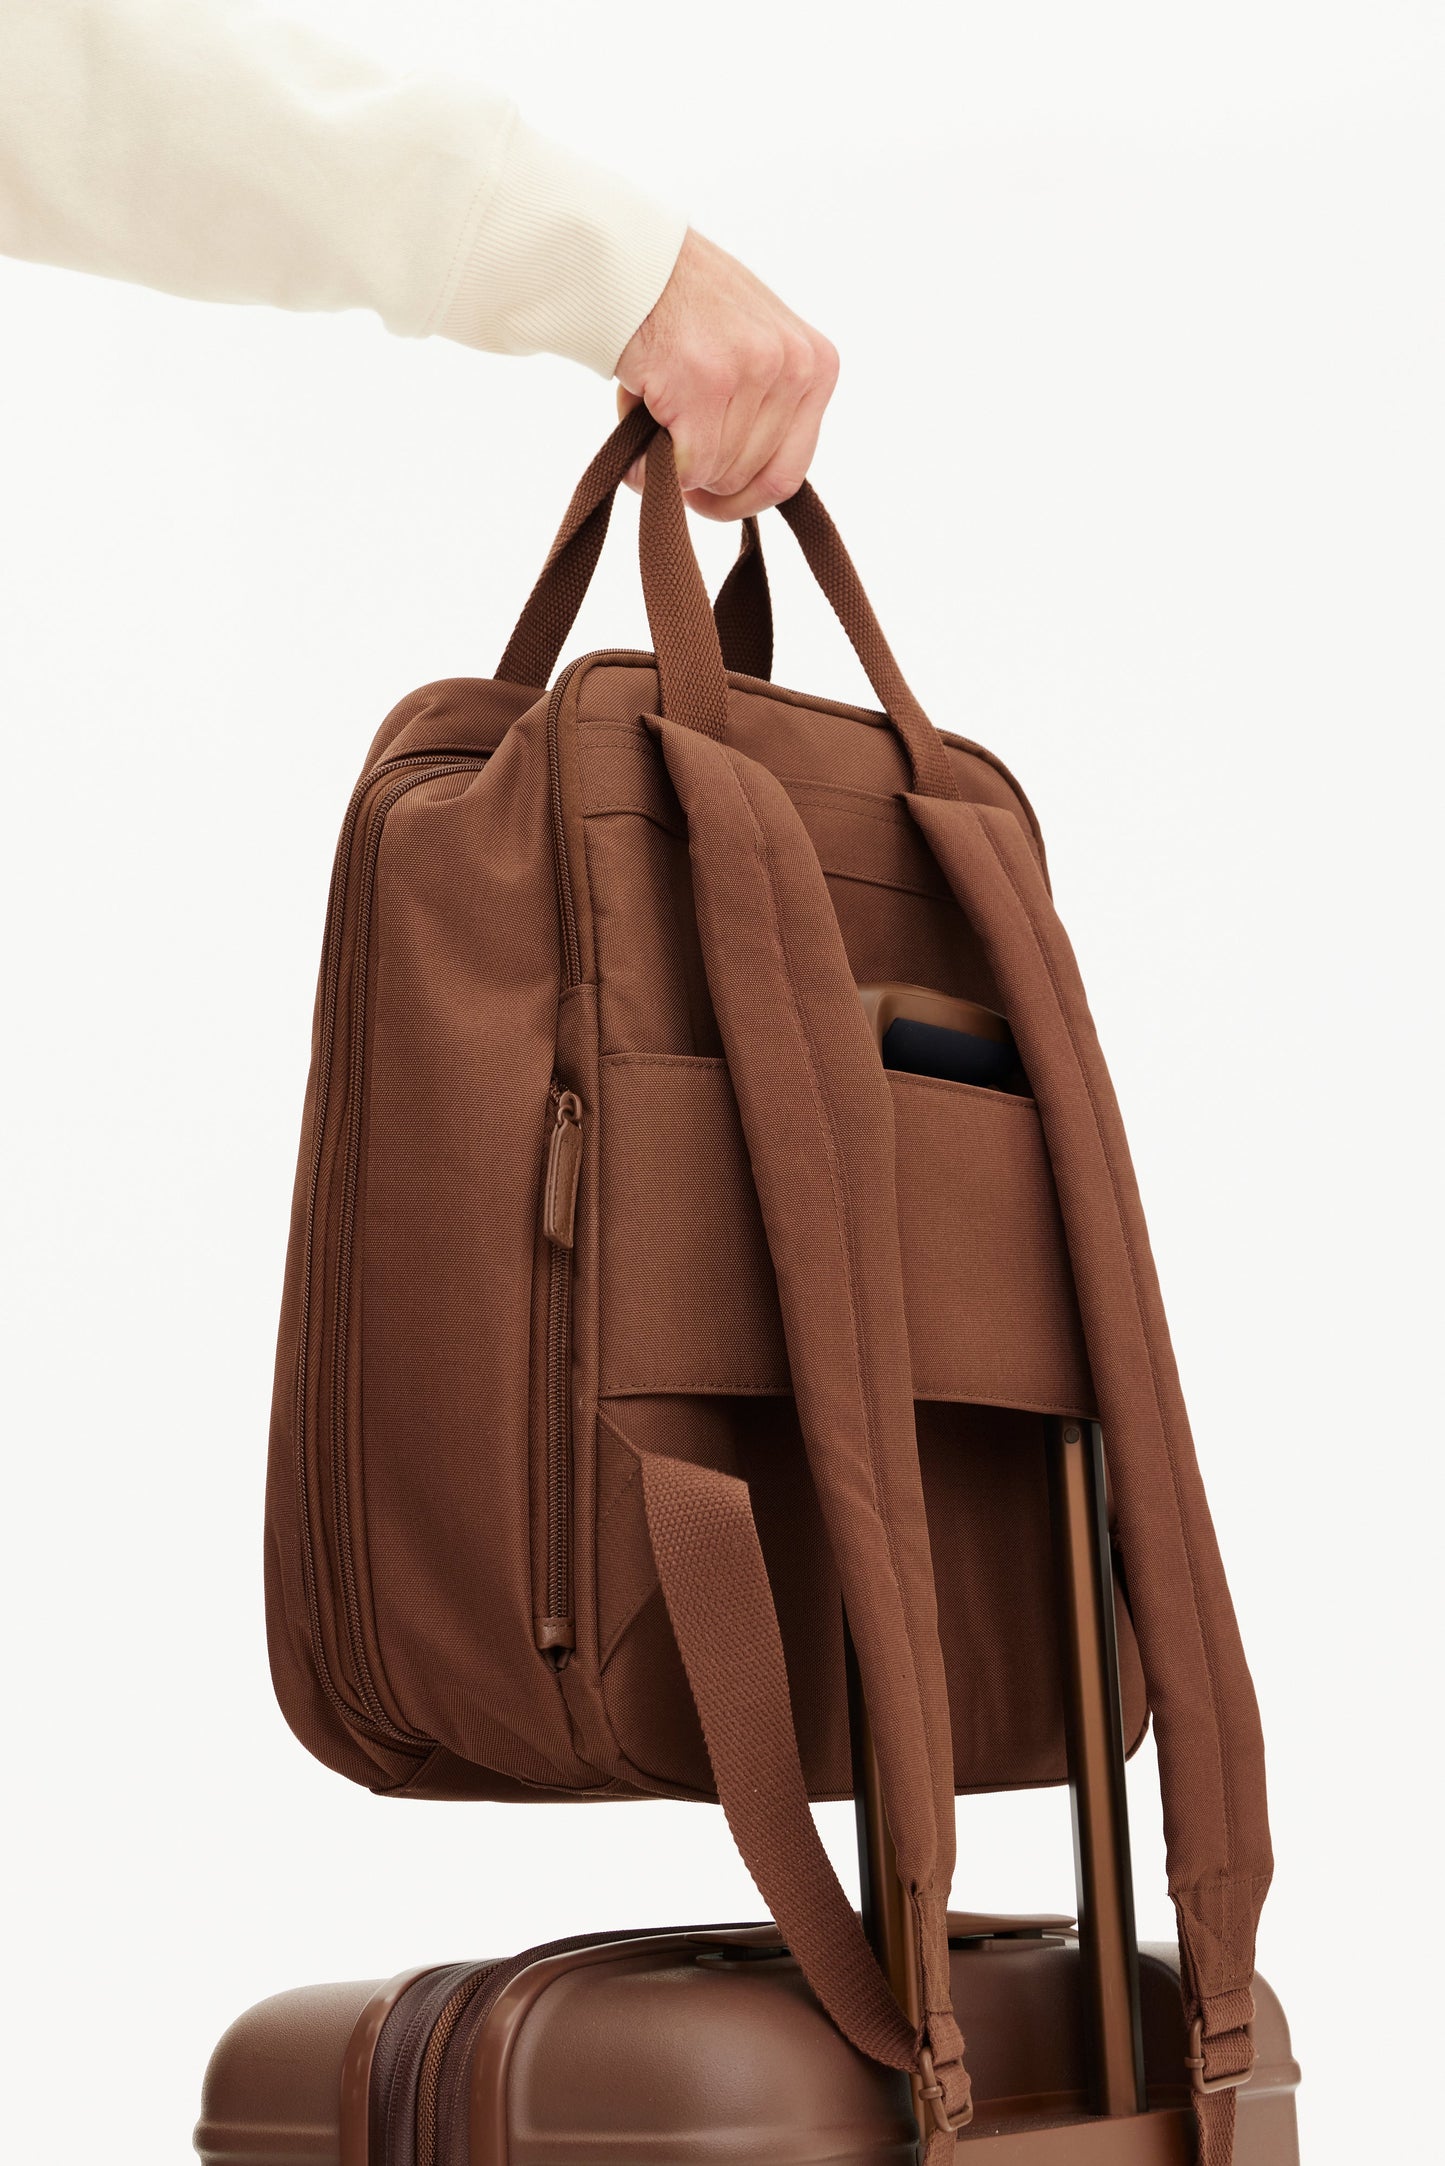 The Expandable Backpack in Maple